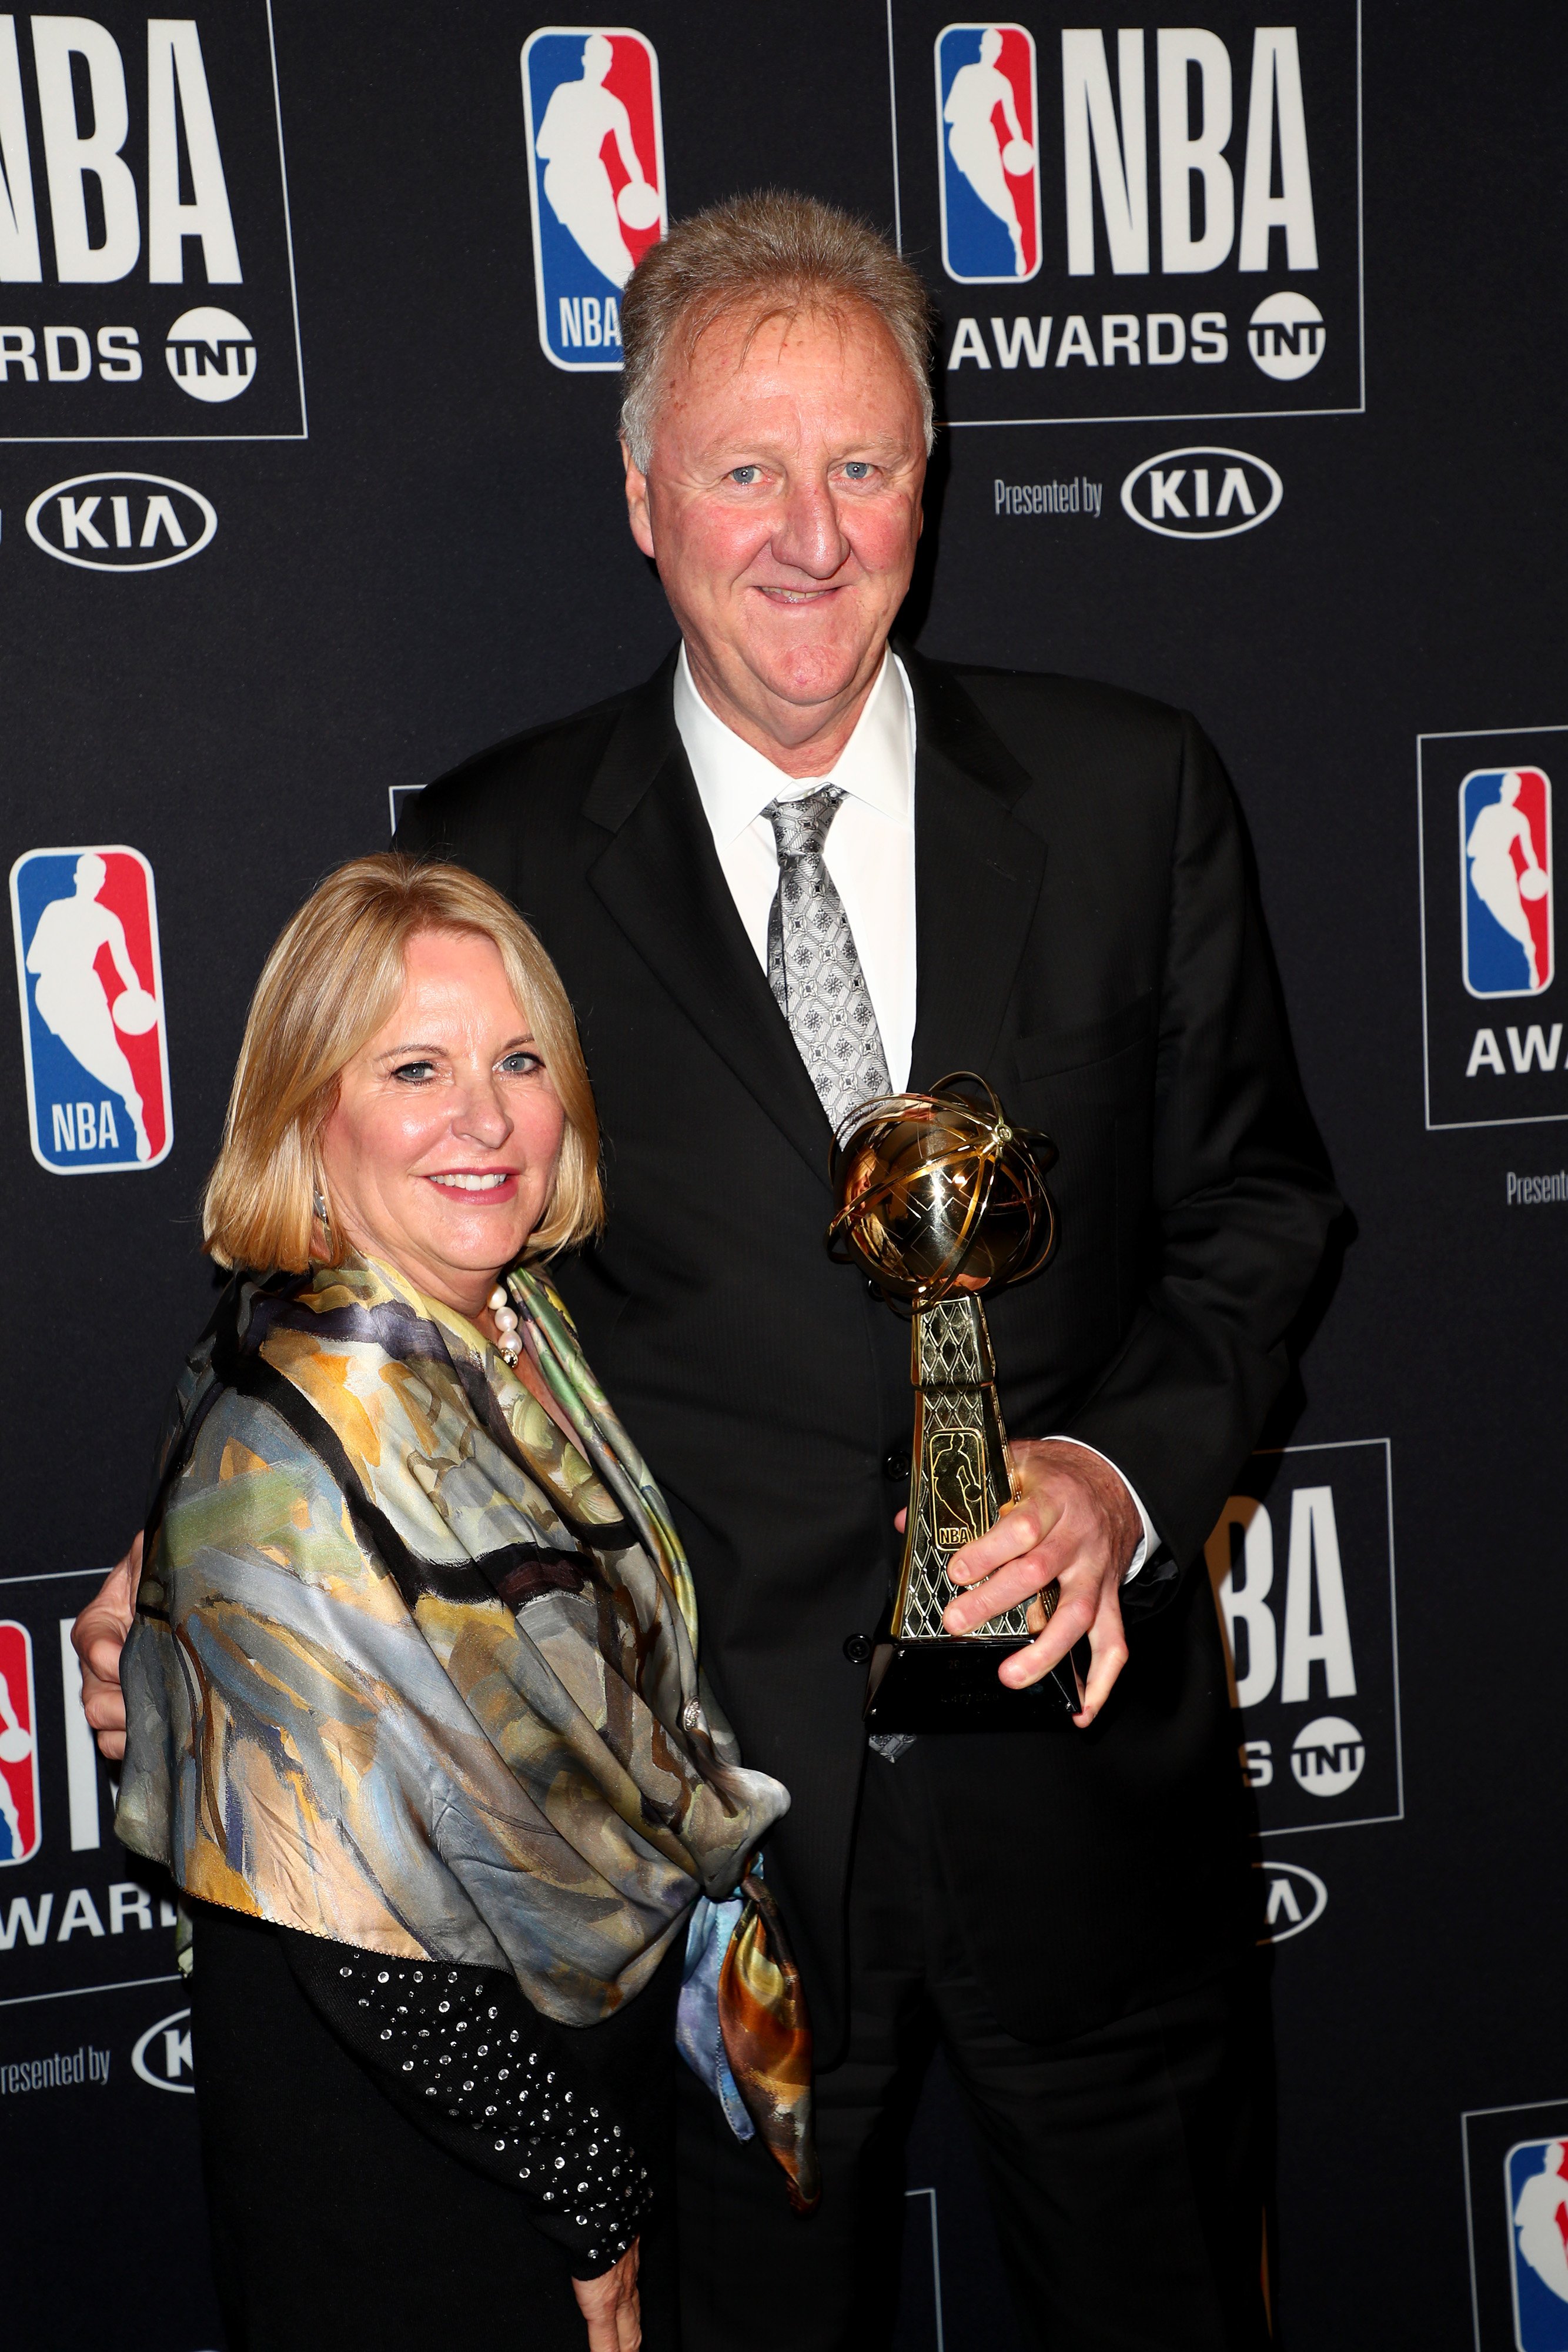 Dinah Mattingly and Larry Bird pose with the 'Lifetime Achievement' award in the press room during the 2019 NBA Awards presented by Kia on TNT at Barker Hangar on June 24, 2019 in Santa Monica, California. | Source: Getty Images